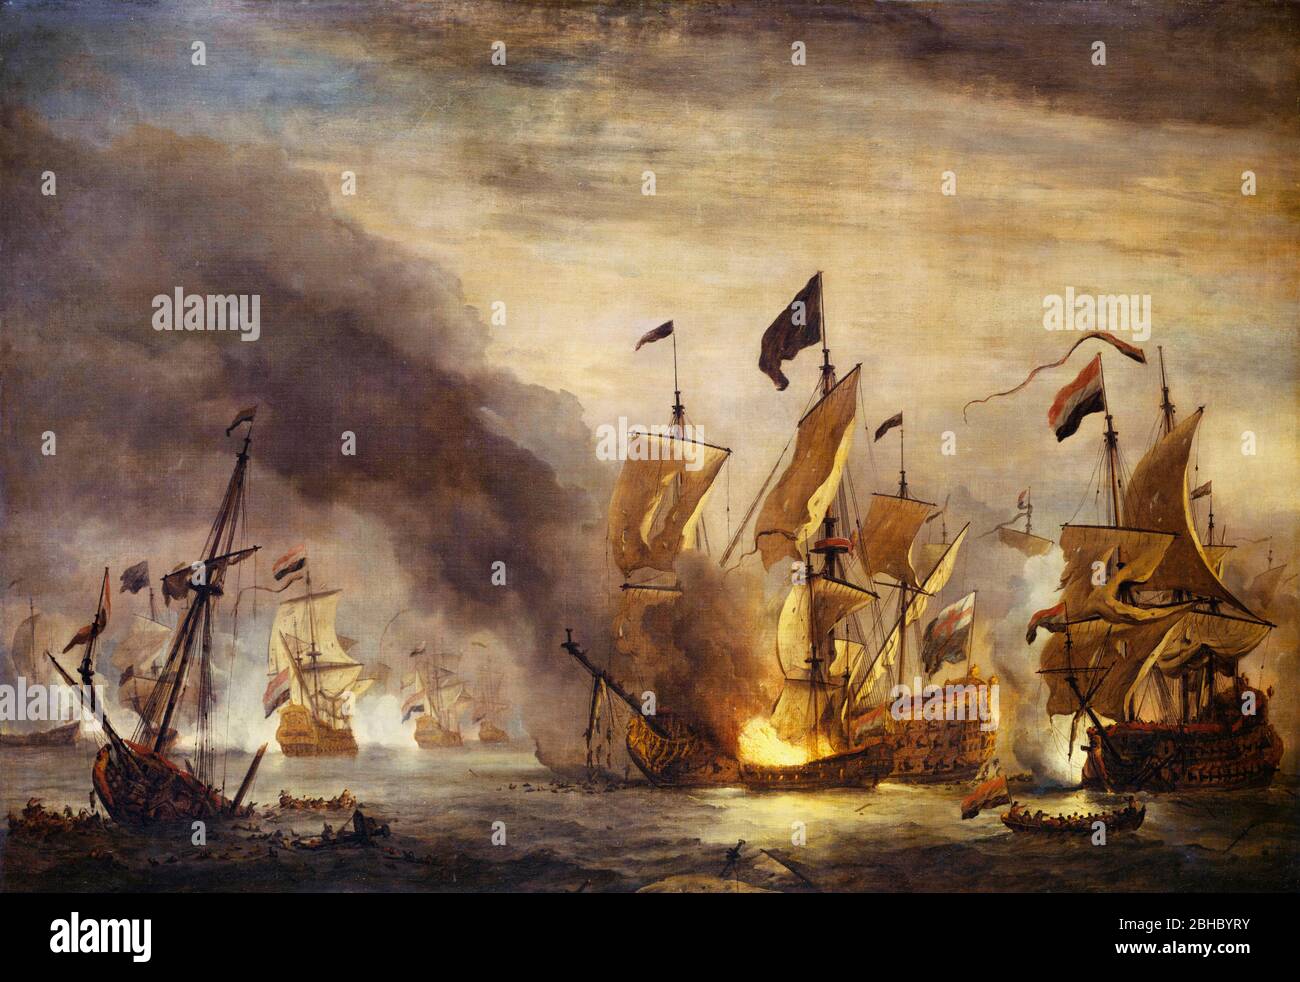 The Burning of the Royal James at the Battle of Solebay, 28 May 1672 - Willem van de Velde the Younger Stock Photo